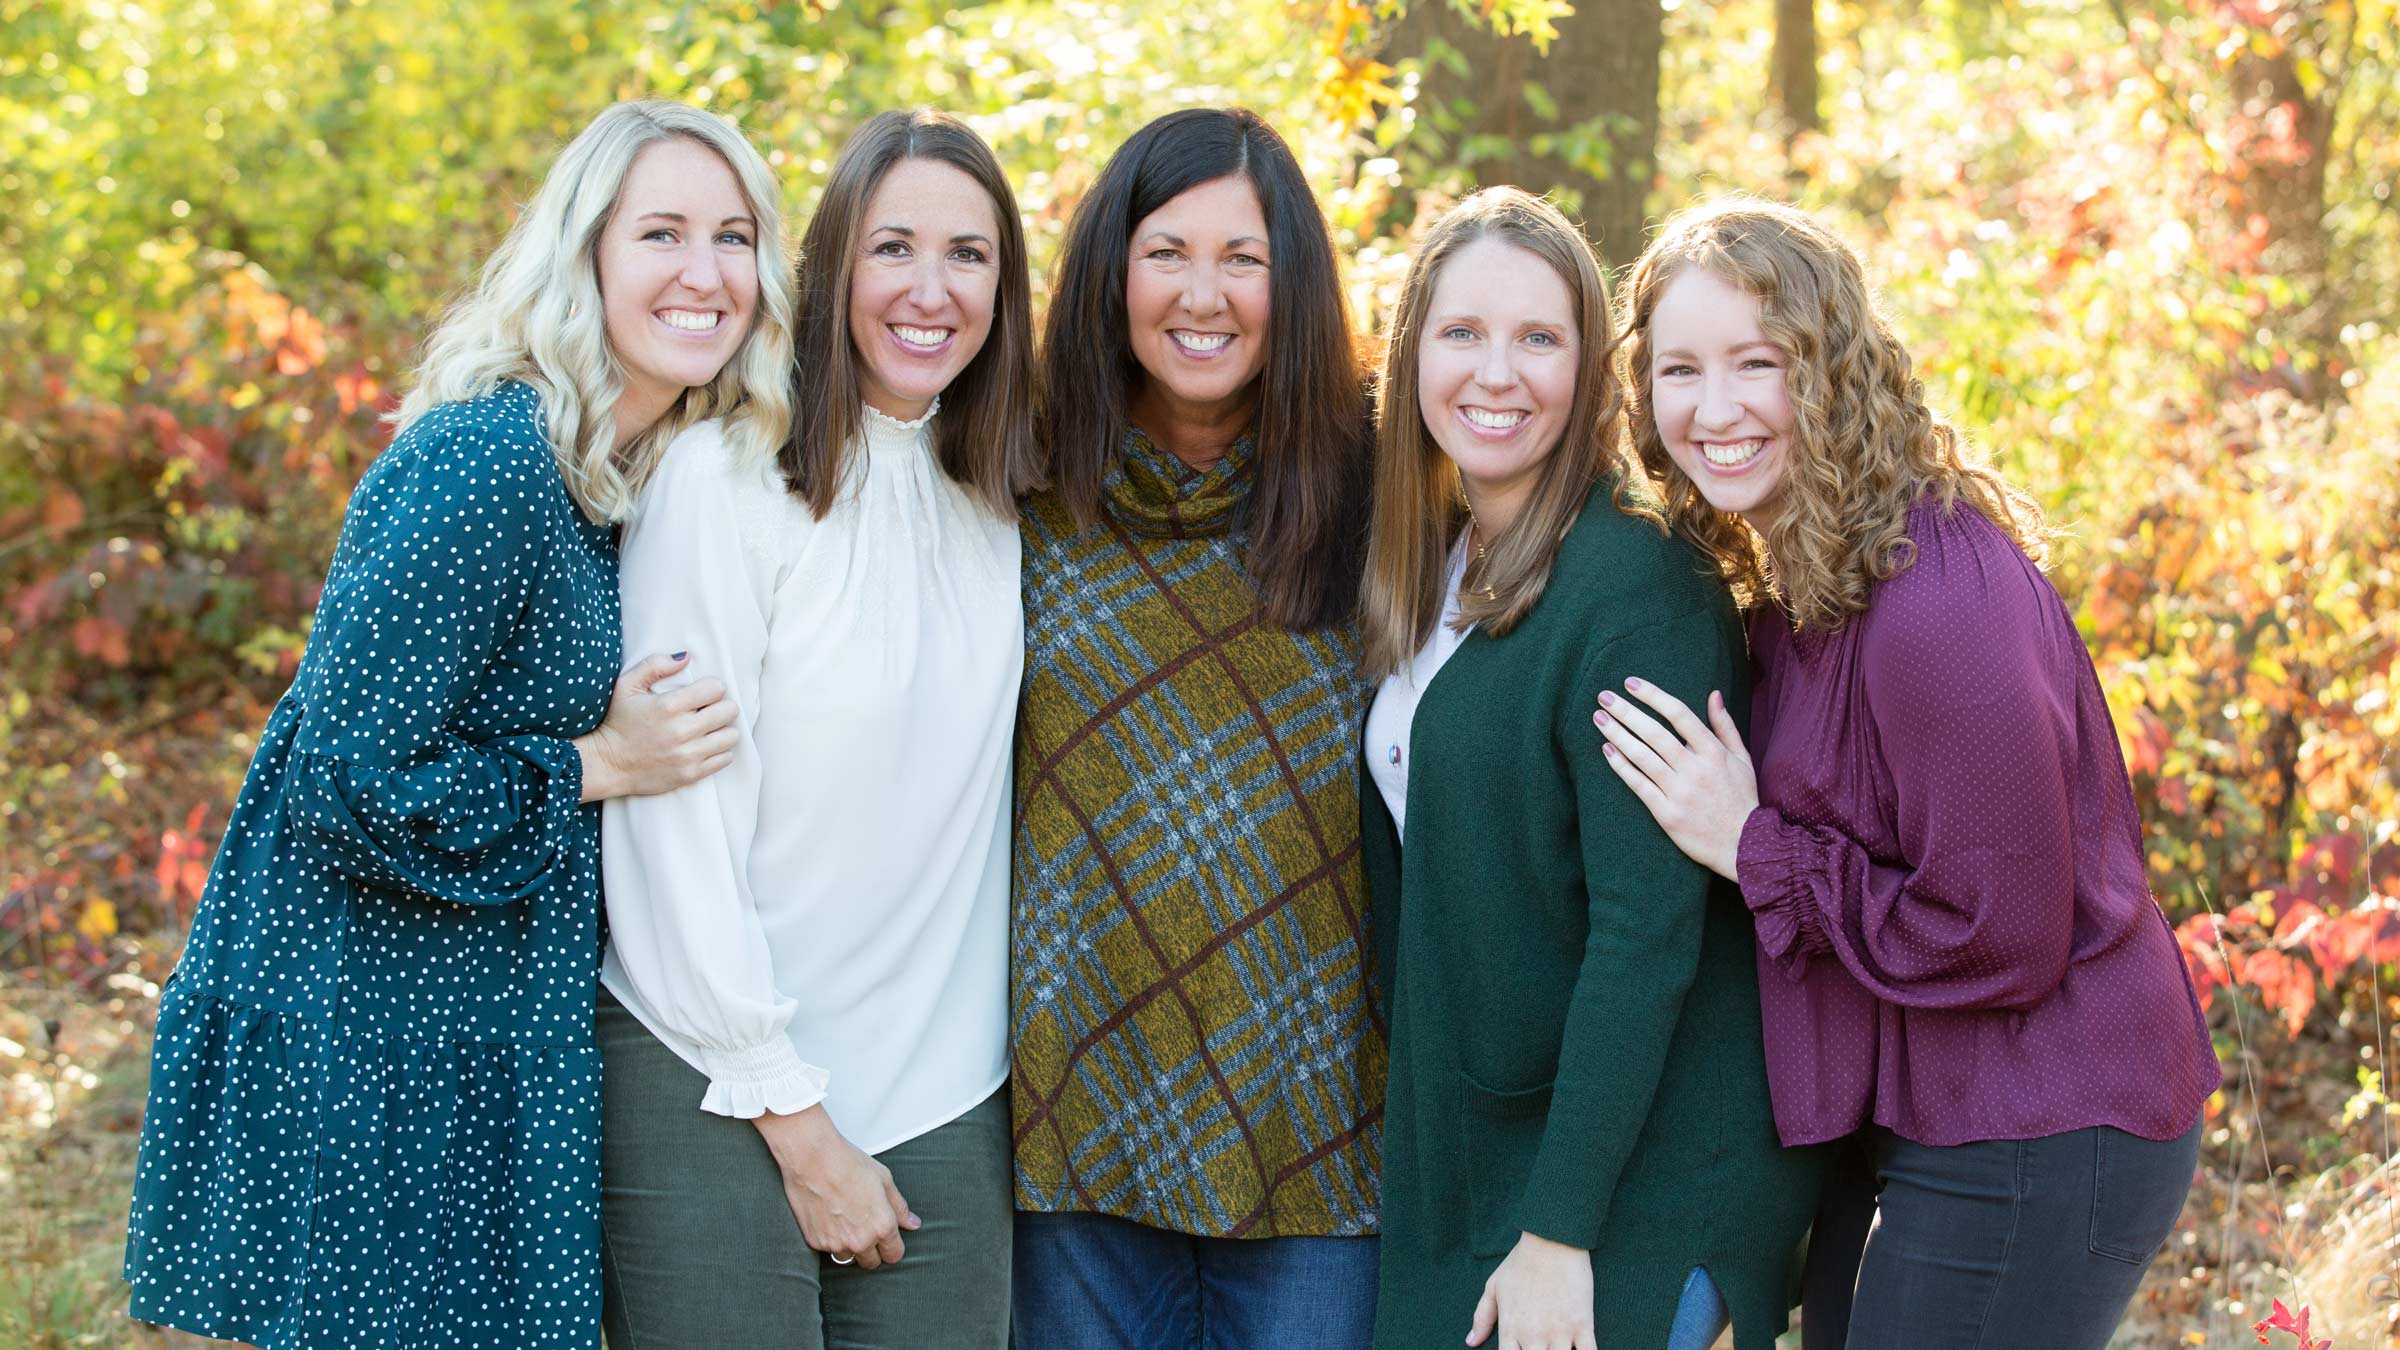 Dr. Hoying with her four daughters